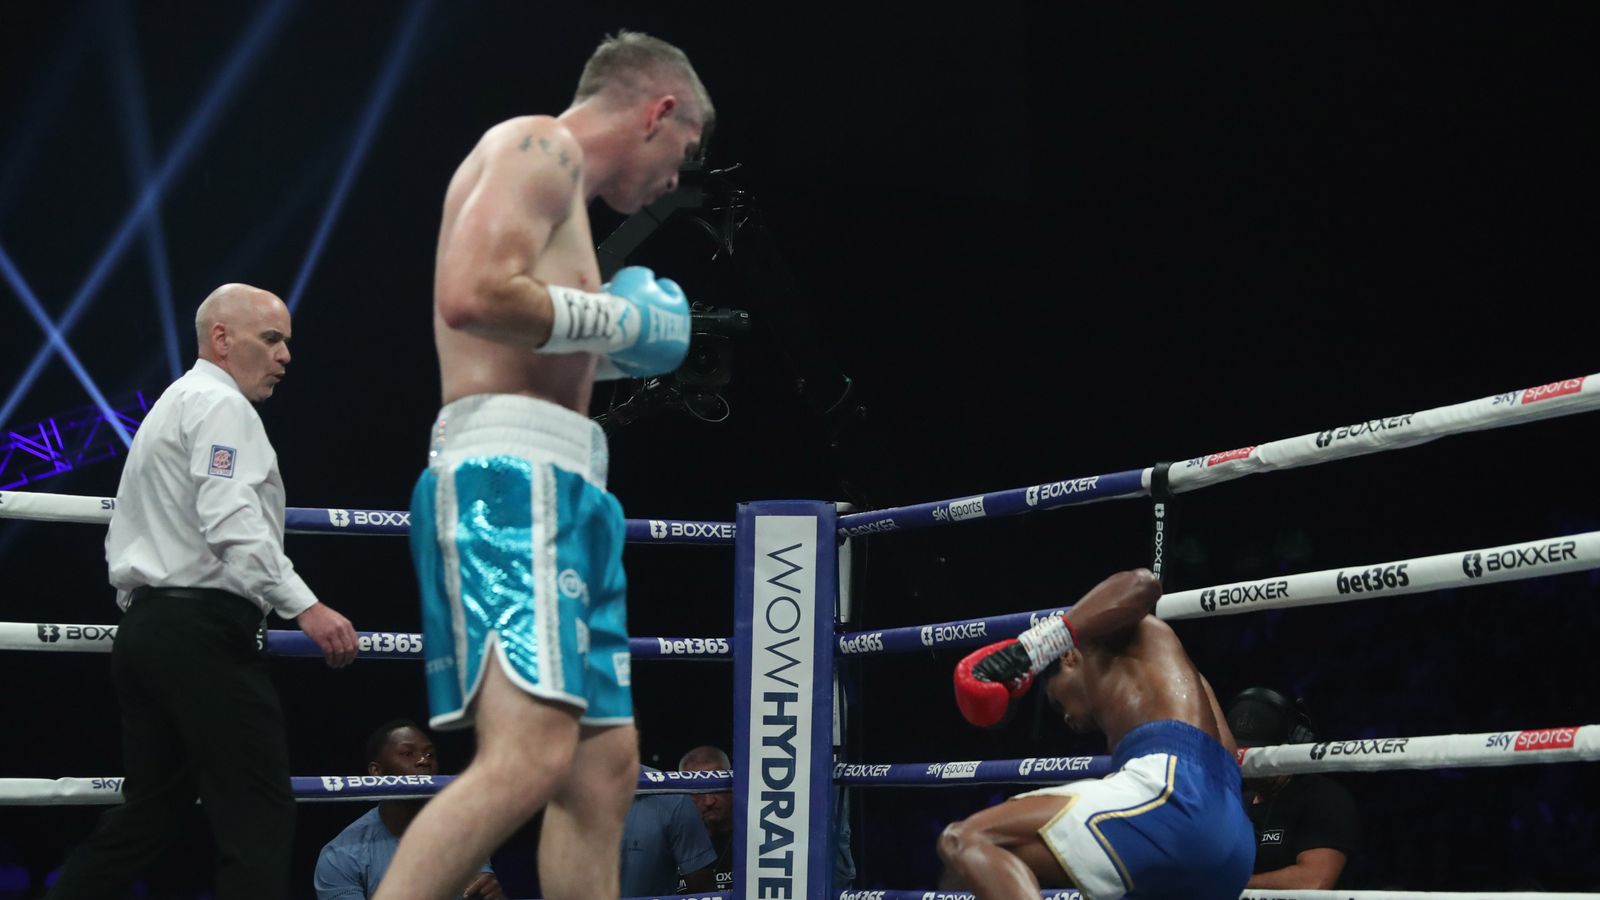 Liam Smith left frustrated as he beats Hassan Mwakinyo in bizarre stoppage finish